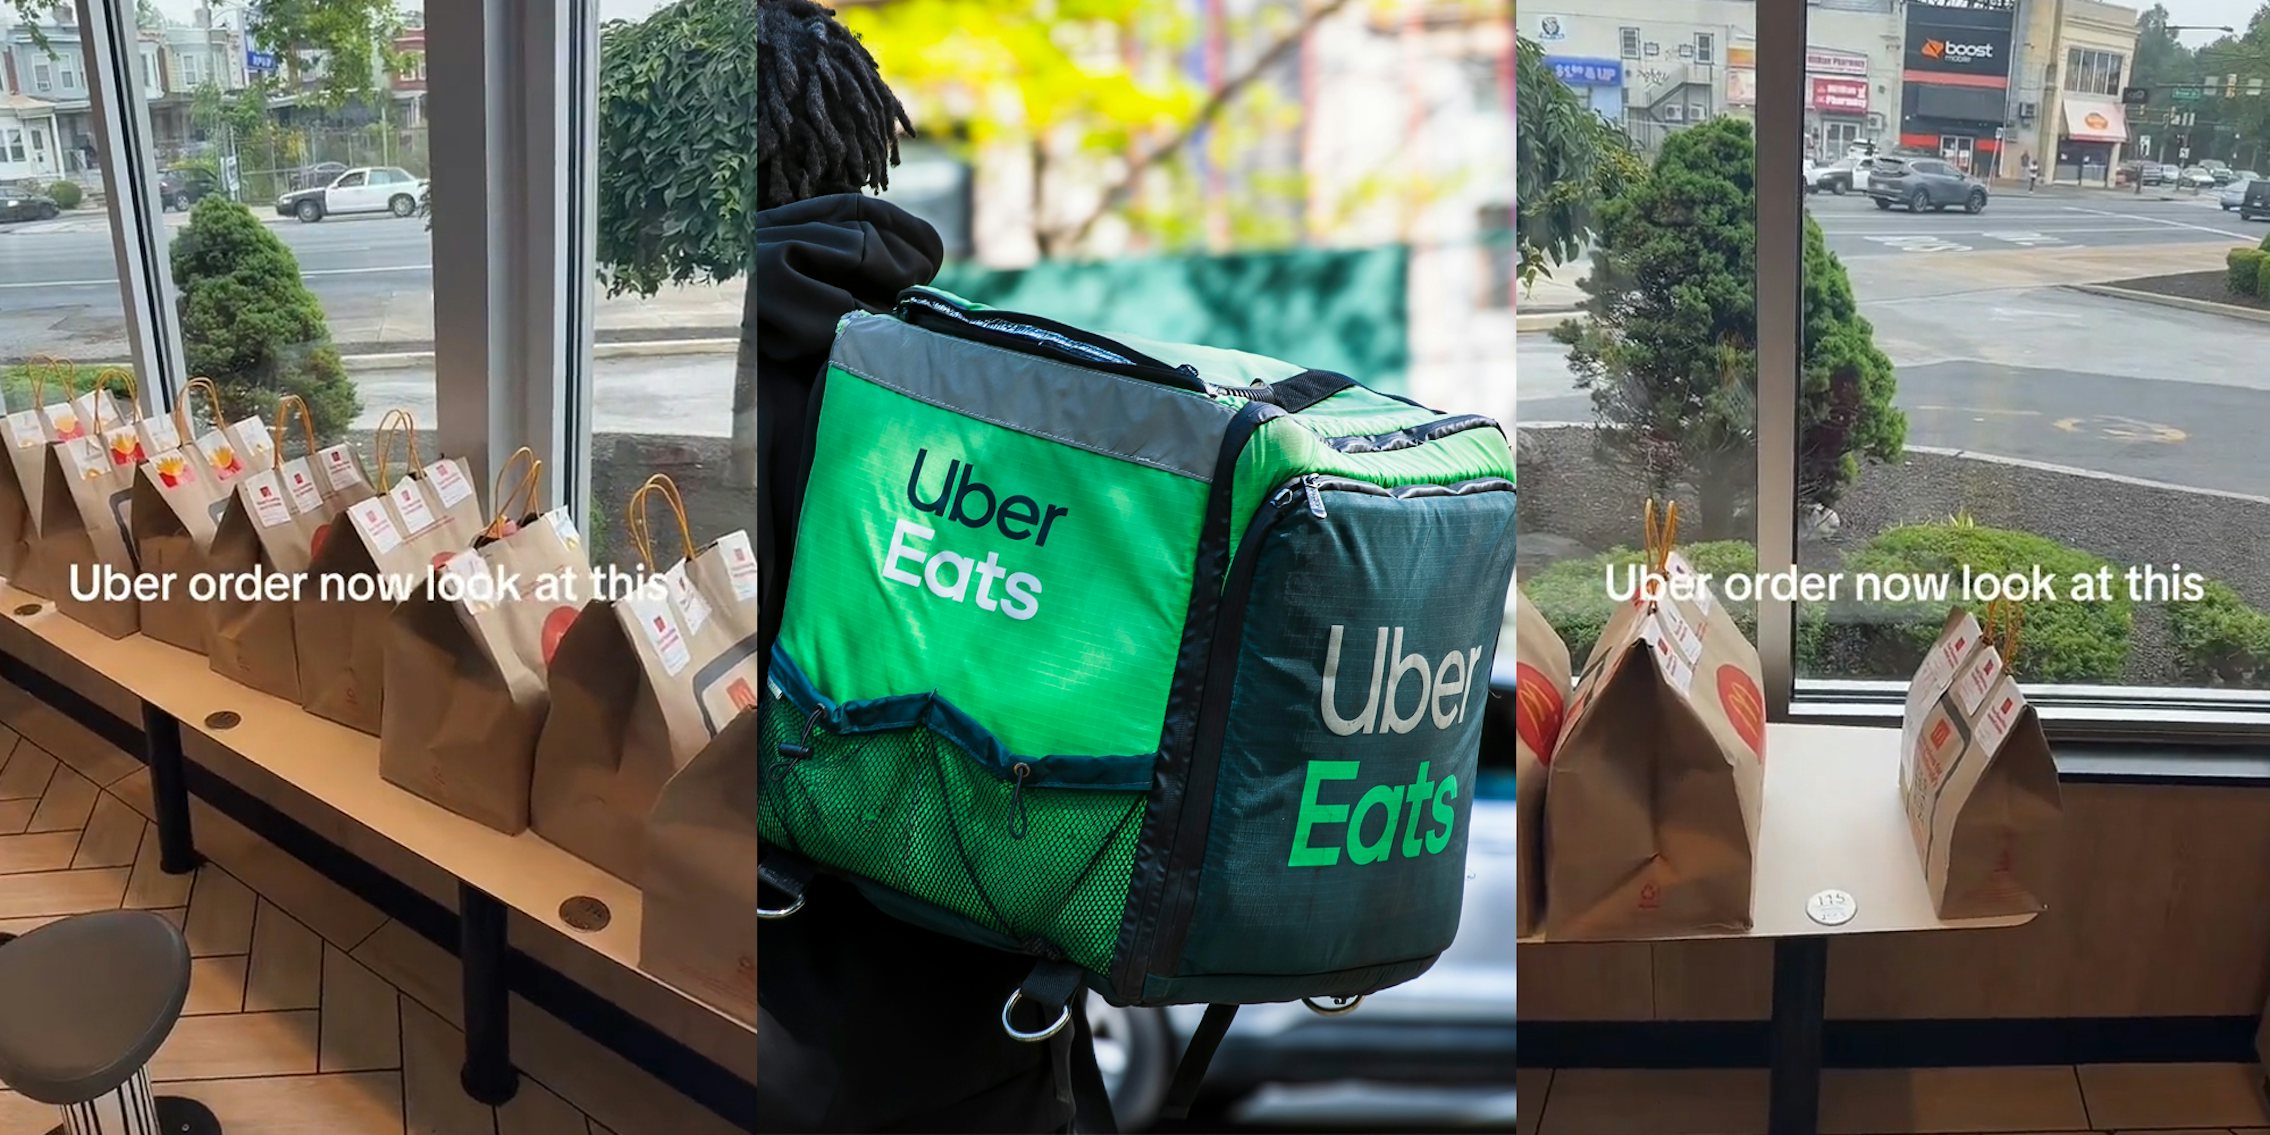 Uber eats order at McDonald's with lots of bags lined up on table with caption 'Uber order now look at this!' (l) Uber Eats employee with branded food carrier backpack (c) Uber eats order at McDonald's with lots of bags lined up on table with caption 'Uber order now look at this!' (r)